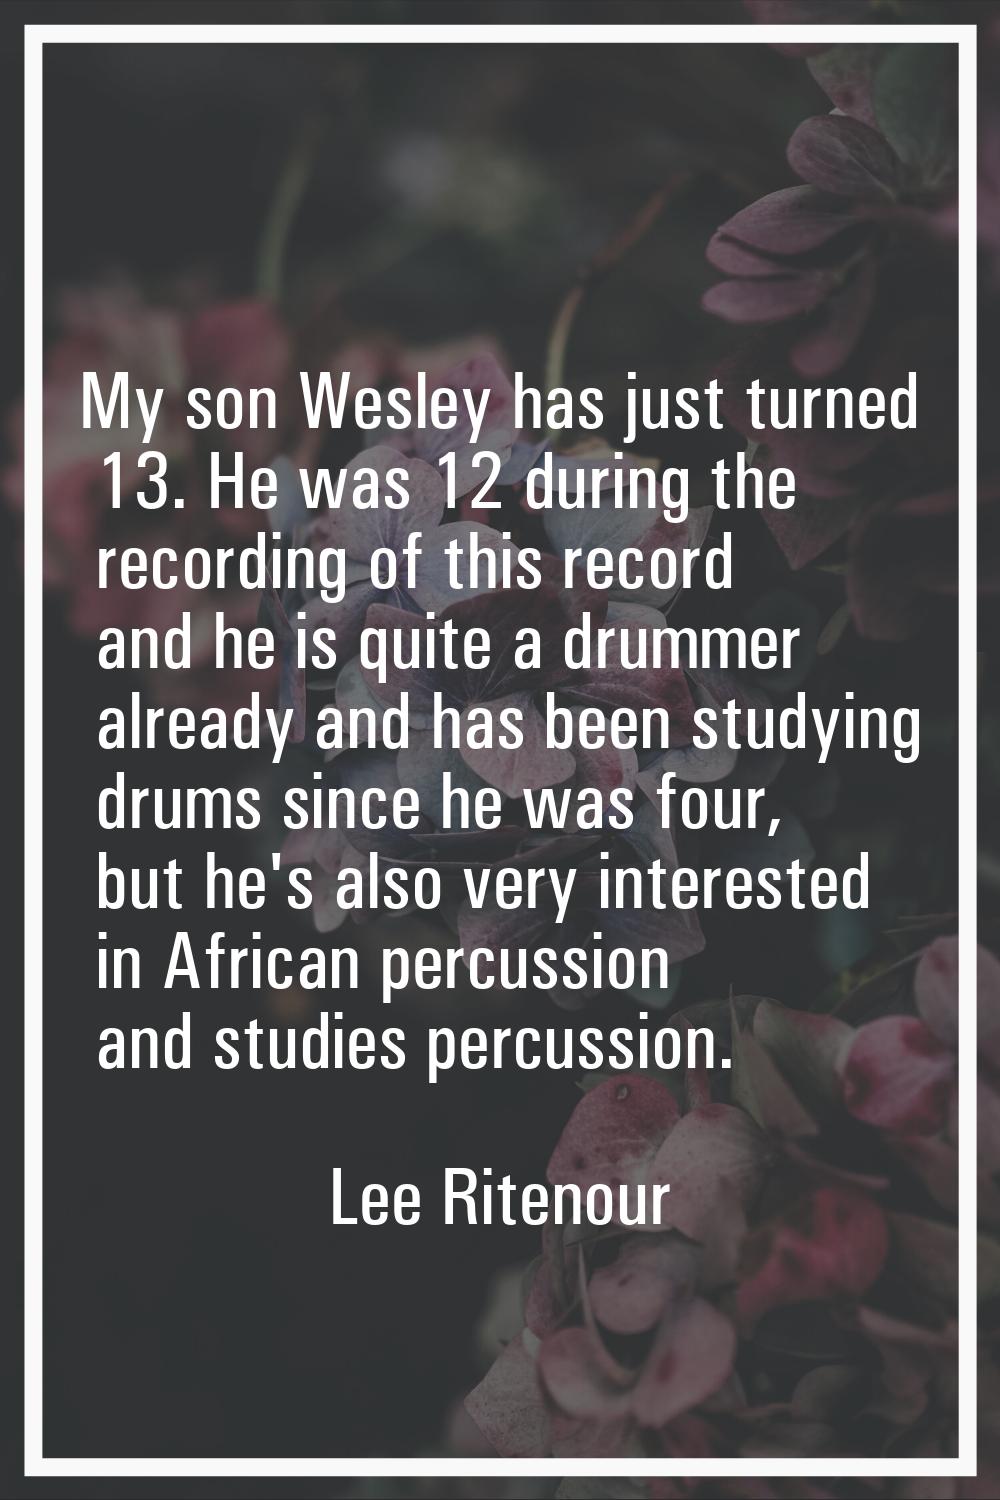 My son Wesley has just turned 13. He was 12 during the recording of this record and he is quite a d